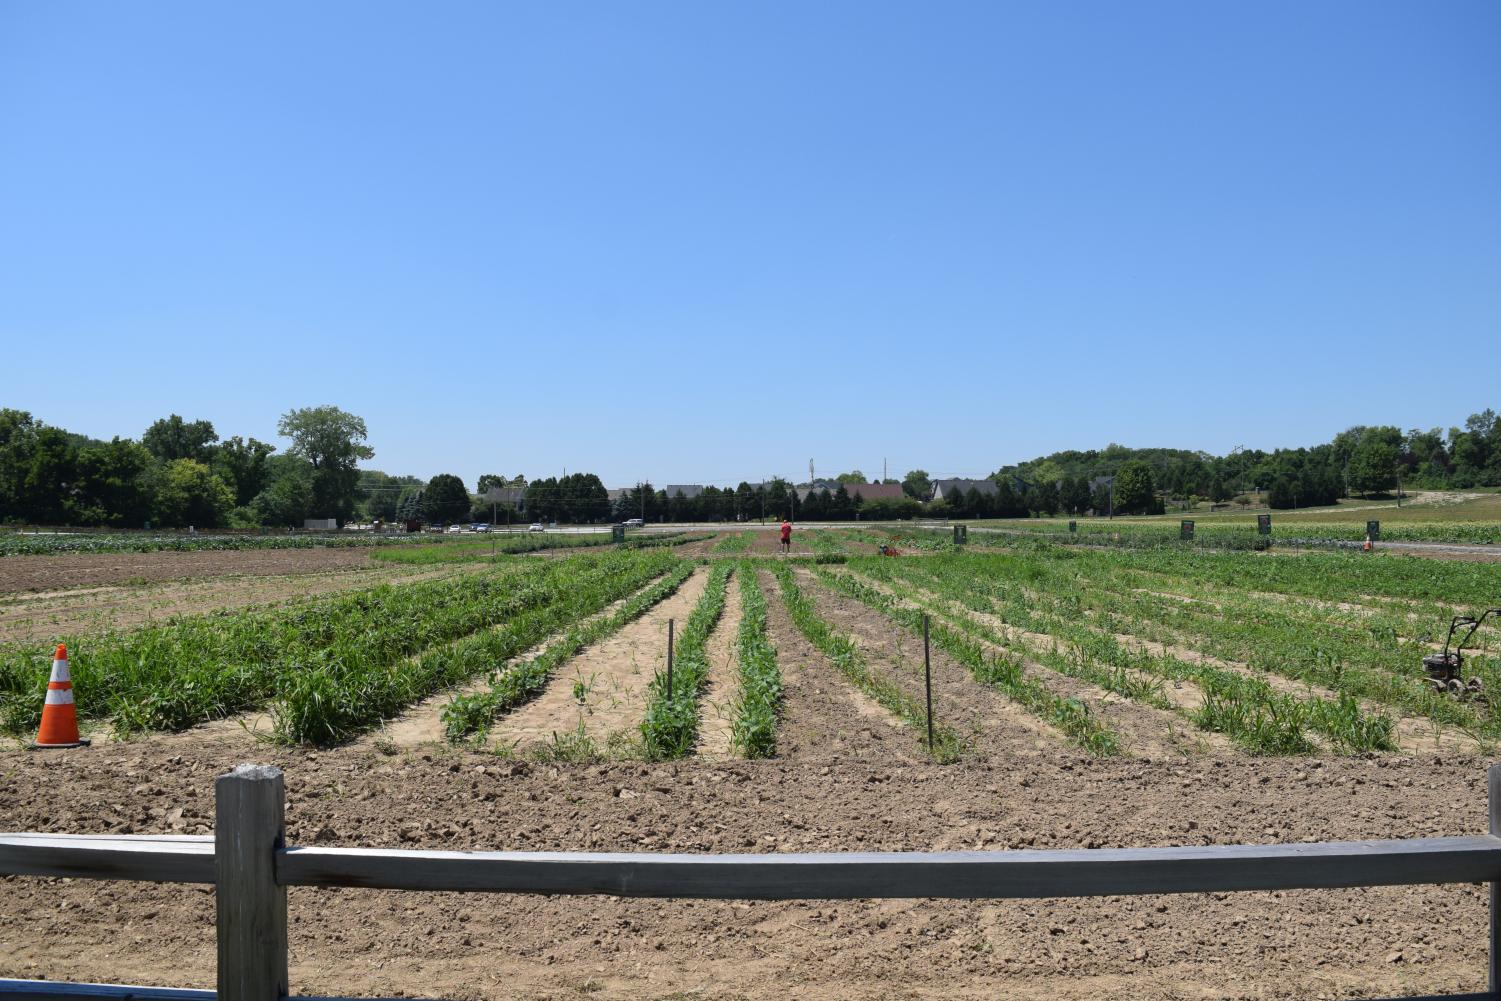 33 acres of community farmland at Agripark located in Fishers, Indiana.